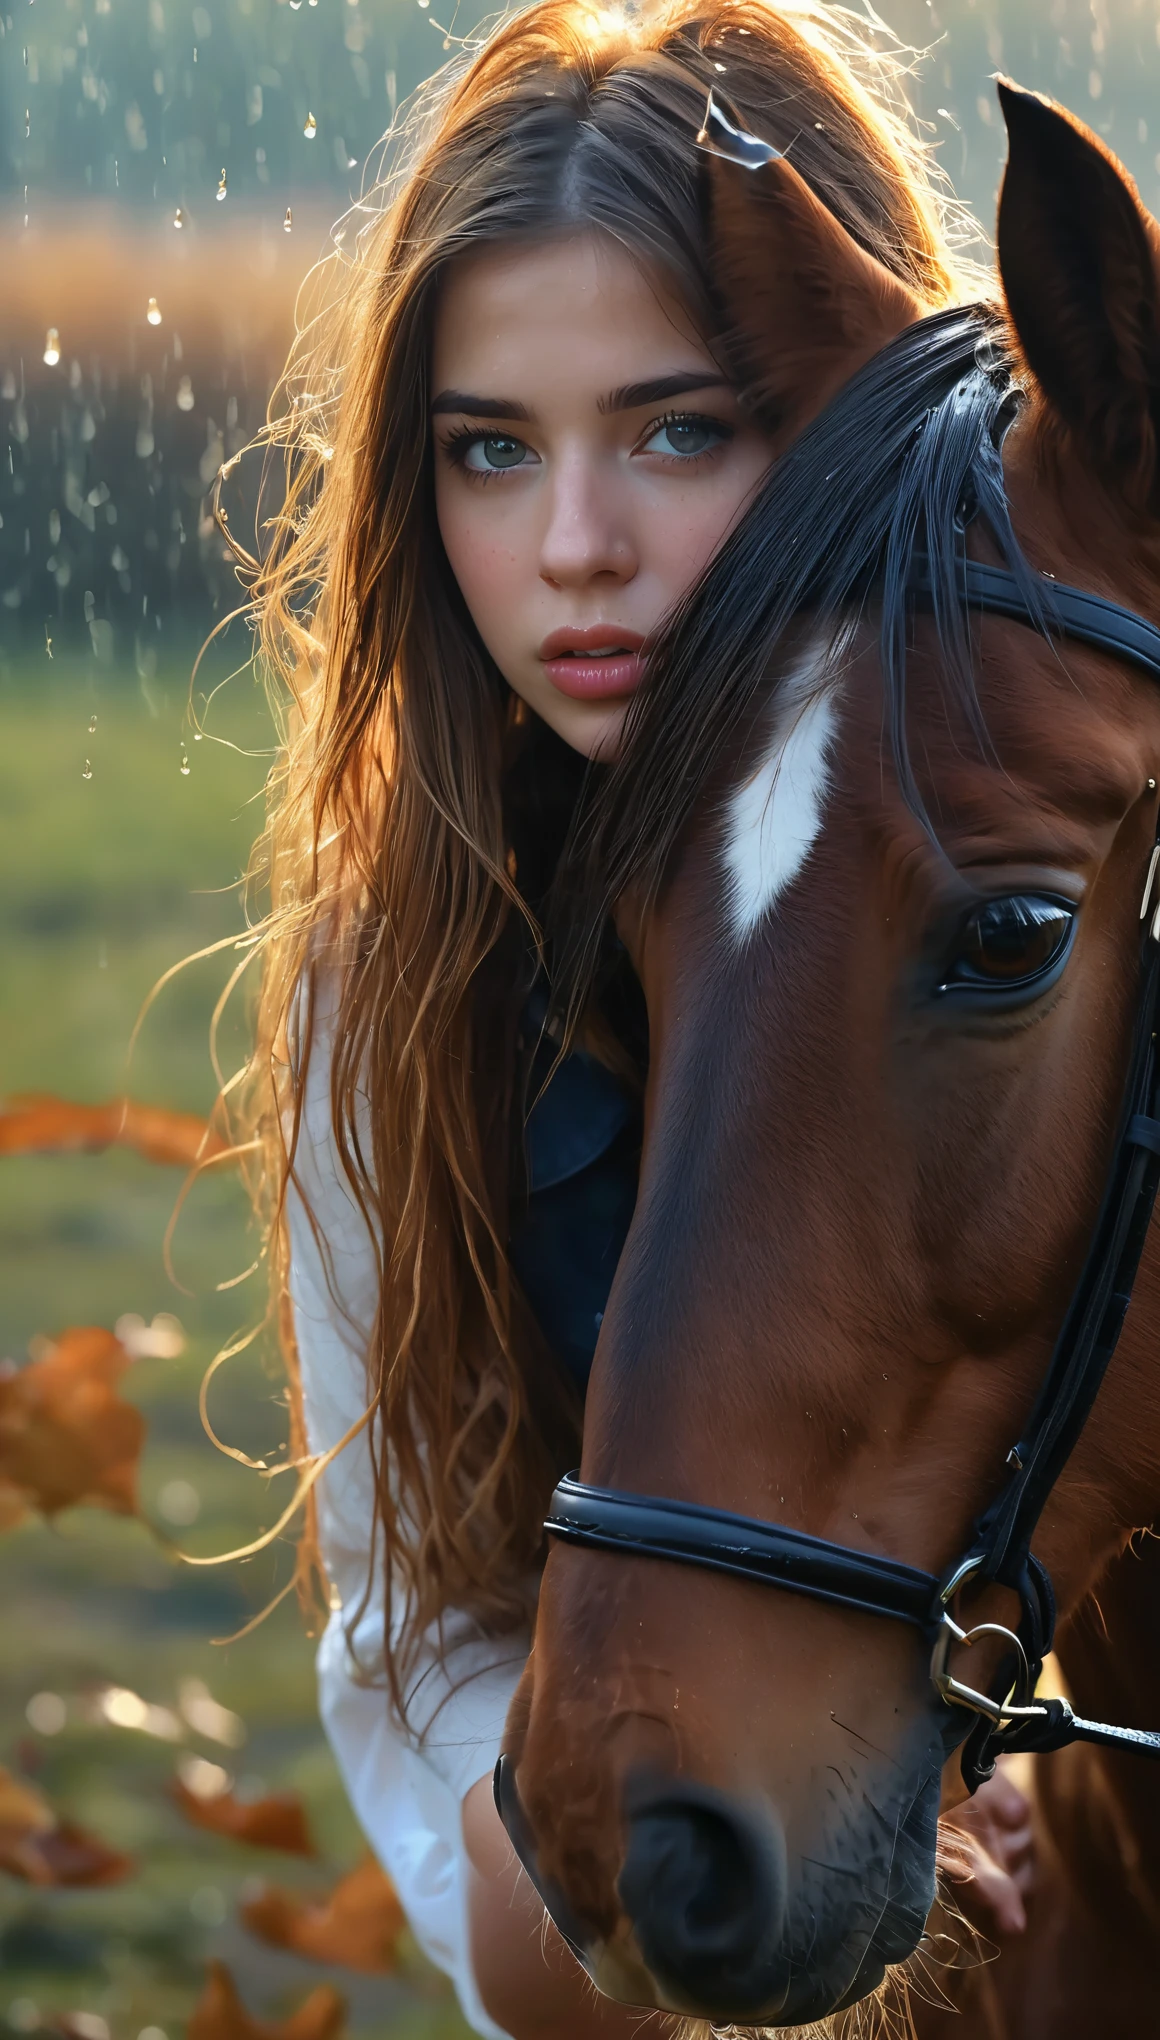 (best quality,4k,8k,highres,masterpiece:1.2),ultra-detailed,(realistic,photorealistic,photo-realistic:1.37),girl in a horse,beautiful detailed eyes,beautiful detailed lips,extremely detailed eyes and face,long eyelashes,autumn colors,falling leaves,soft sunlight,sadness,raining,horse with flowing mane,emotionally expressive girl,lonely girl in a vast field,moody atmosphere,dramatic lighting,subtle mist,damp ground,melancholic mood,color palette of warm earth tones,subdued colors,elegance of nature's fading beauty,gentle sorrow,quiet strength,captivating serenity,deep contemplation,horseback riding in the rain,reflections of the girl and horse in puddles,windblown hair,blurred raindrops in the foreground,ethereal beauty,almost magical,poetic melancholy,nostalgic aura,emotional connection between the girl and the horse.